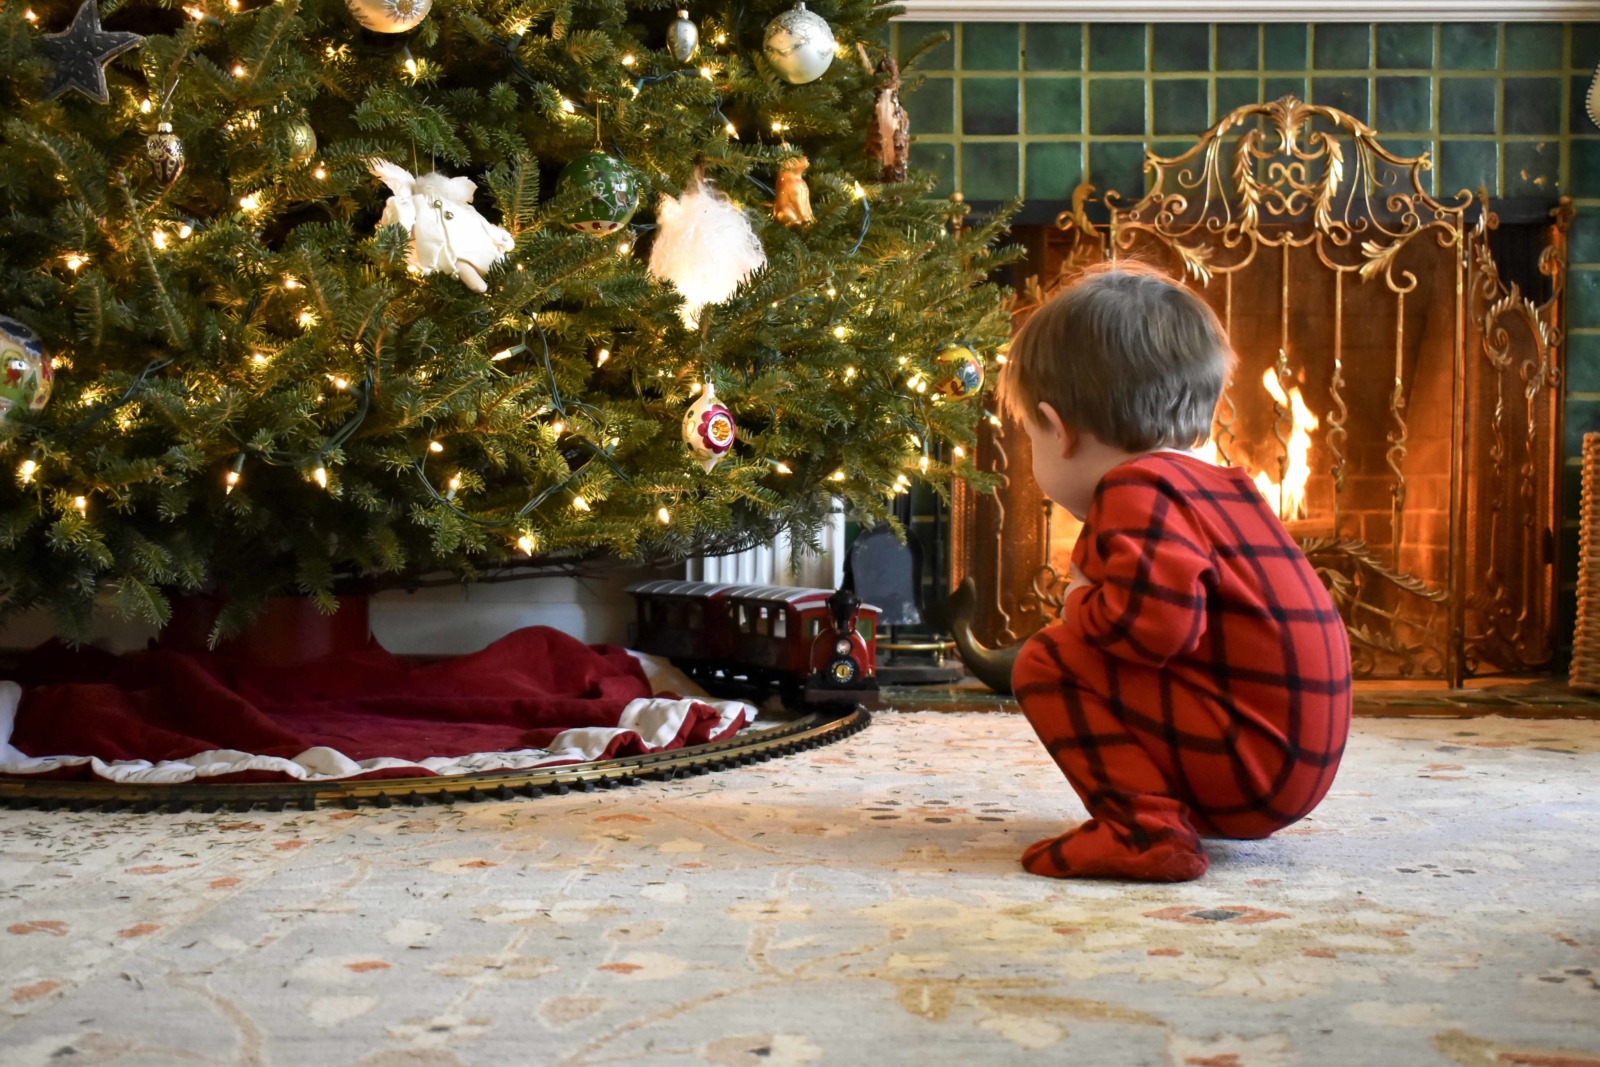 Toddler at Christmas. Photo by @midwestphotographs via Twenty20